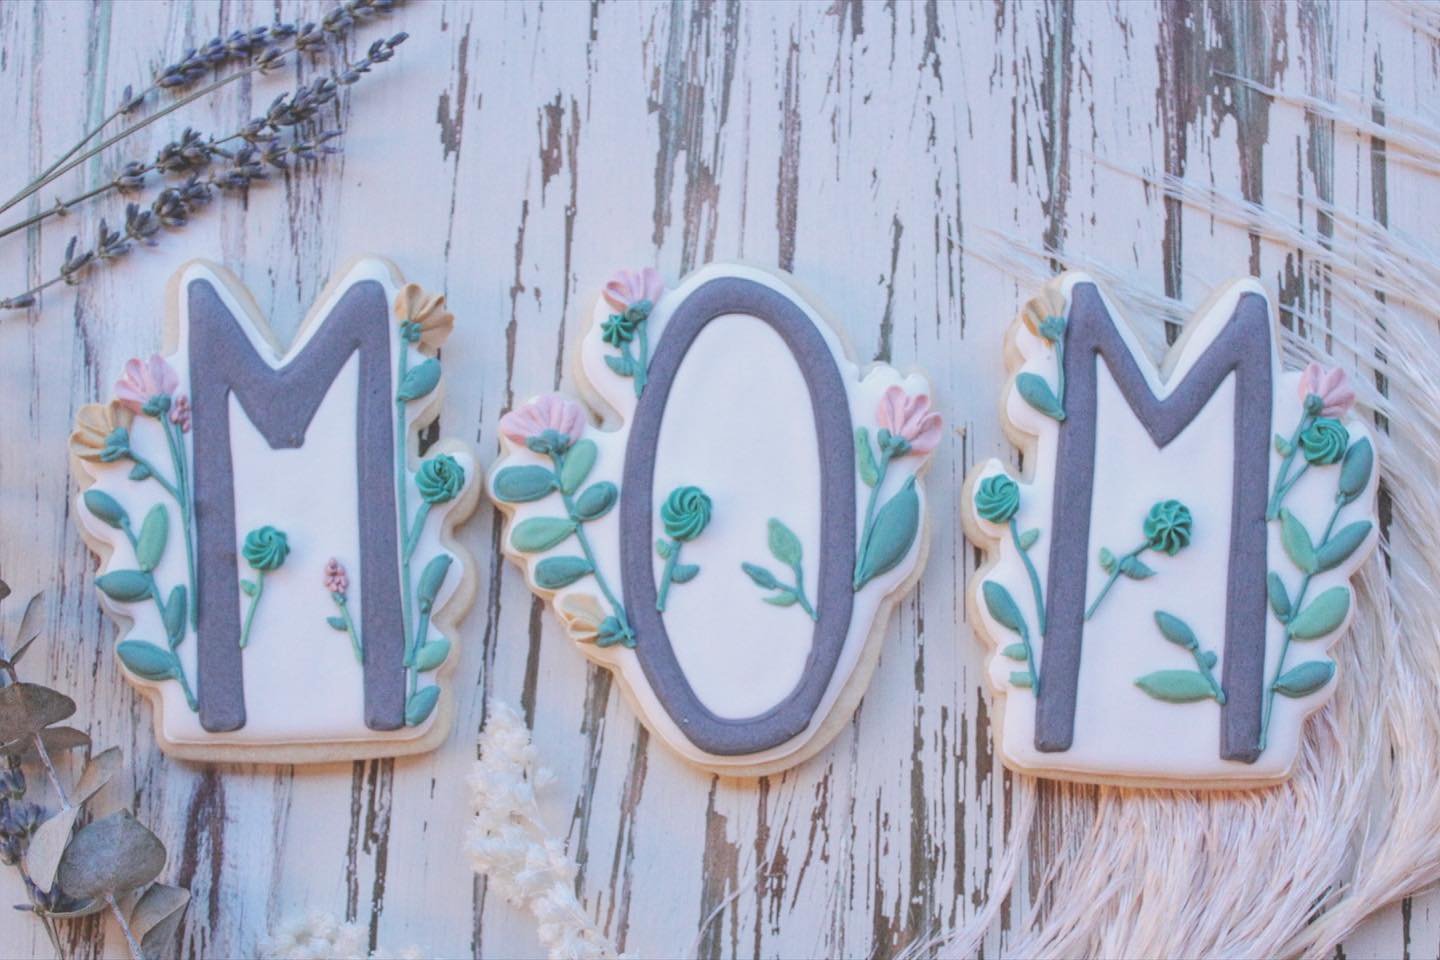 // Mother&rsquo;s Day // 
To celebrate the mother figure in your life we are so excited to be offering a NEW cookie set. Our vanilla sugar cookies decorated for MOM with vanilla Royal icing and all the floral details. Three cookies packaged as a gift